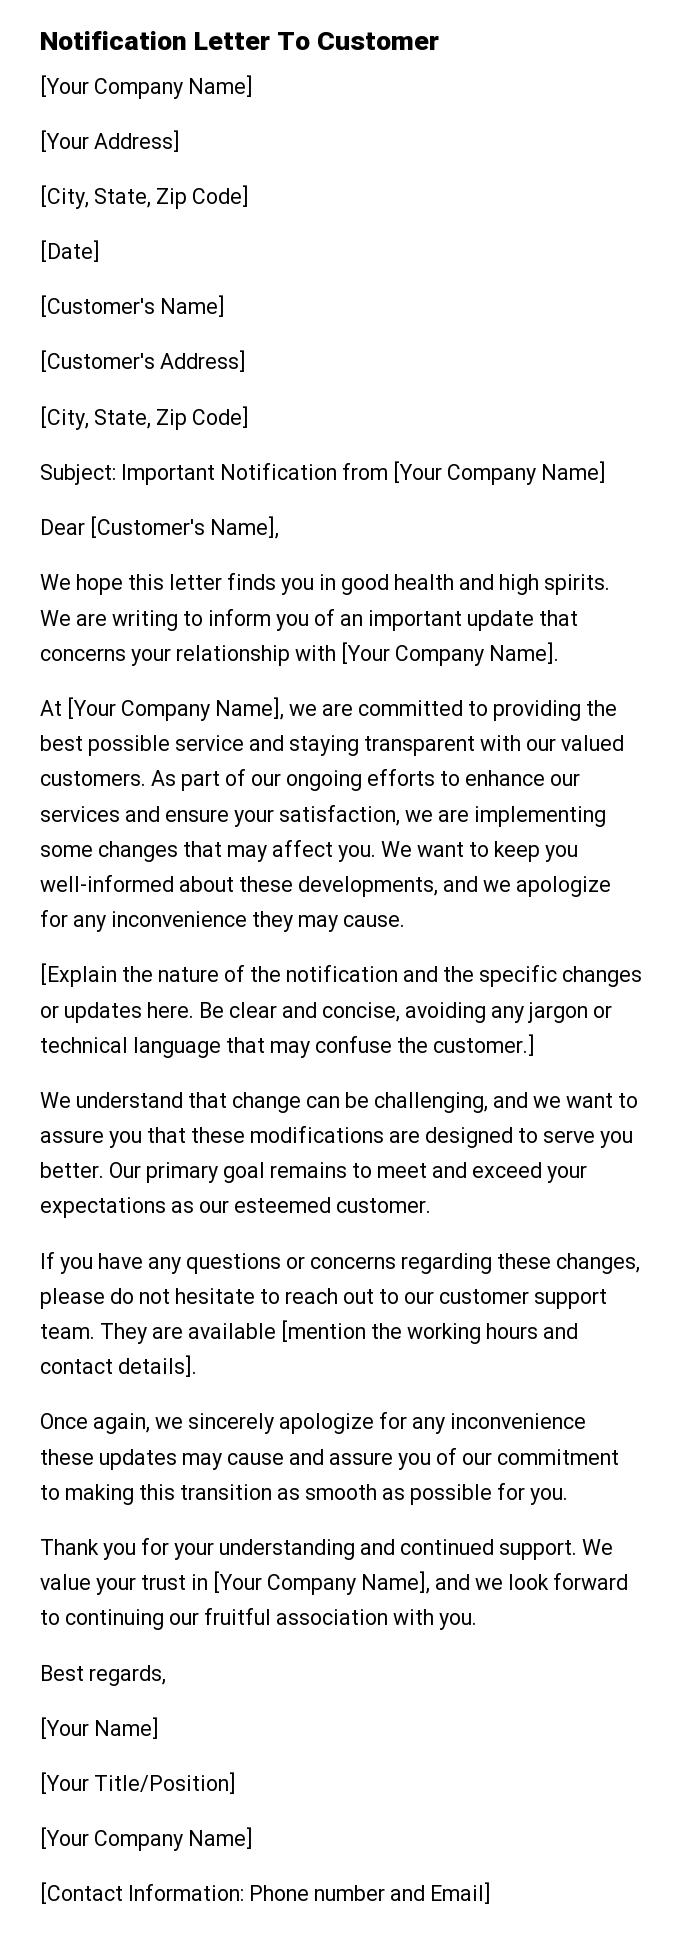 Notification Letter To Customer